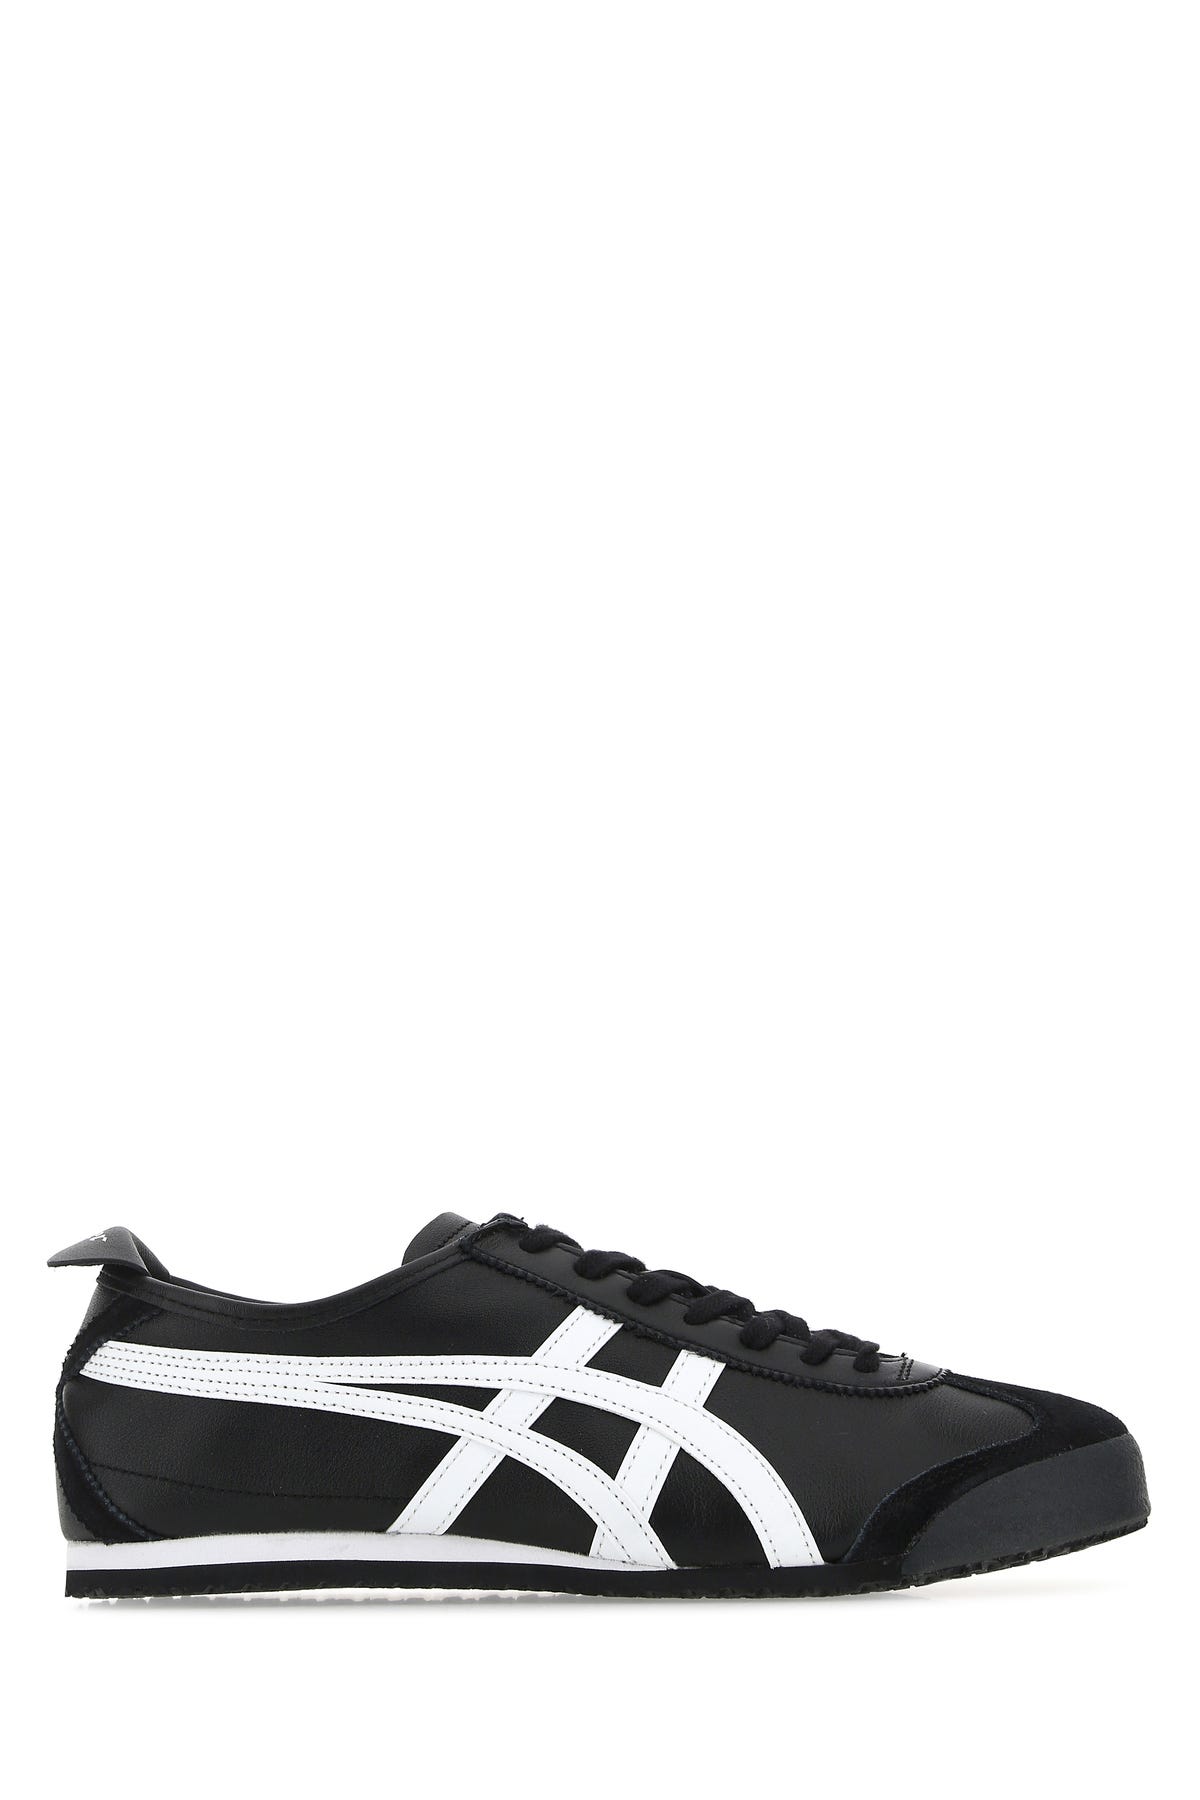 Onitsuka Tiger Sneakers-8+ Nd  Male,female